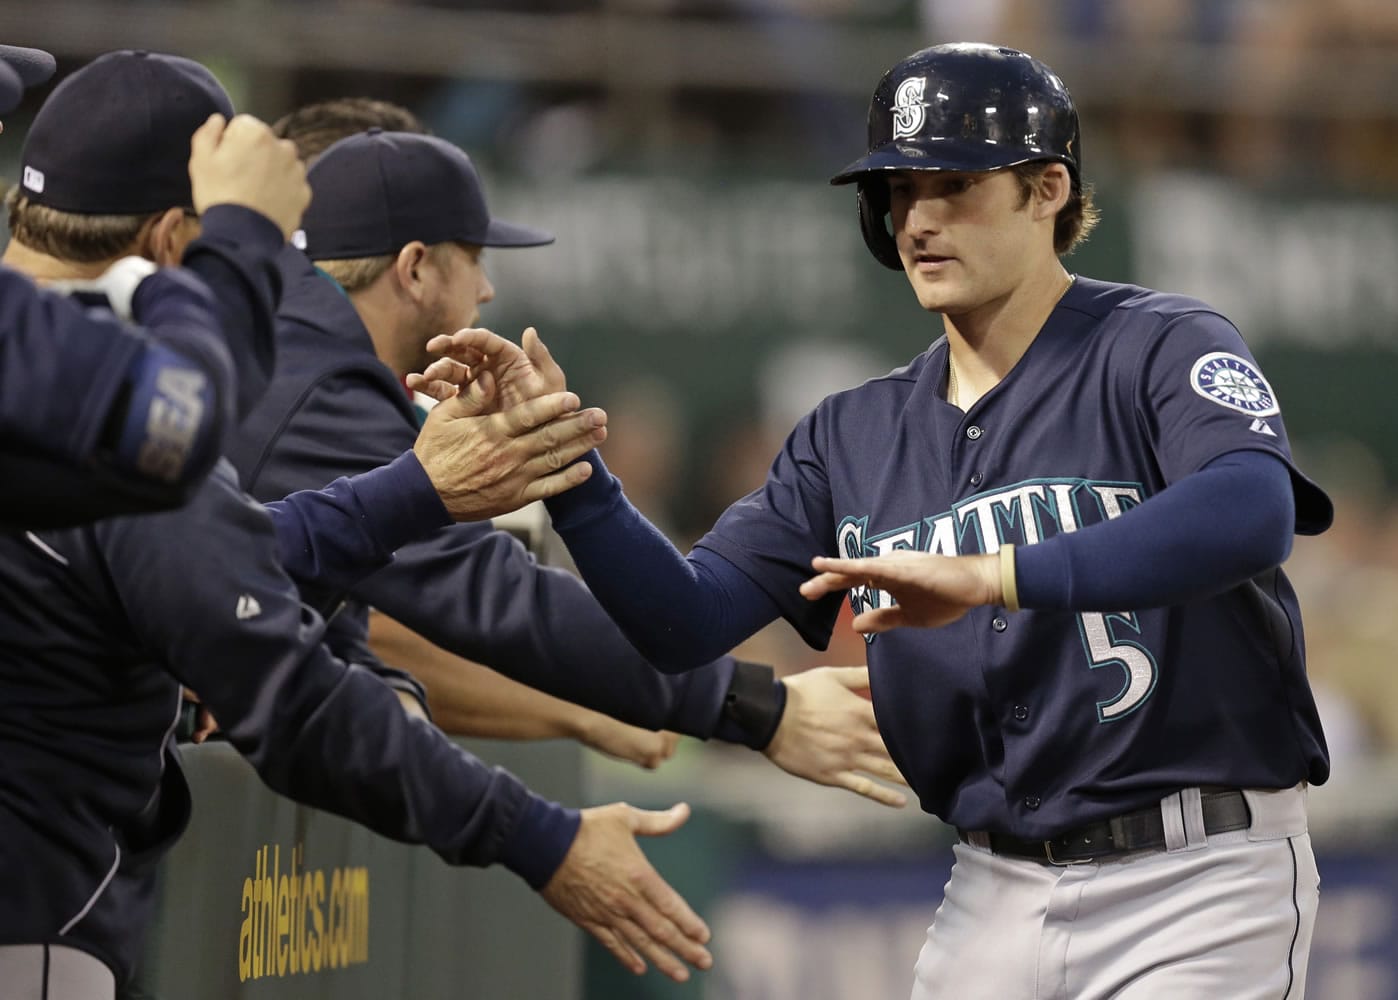 Seattle Mariners' Brad Miller, right, is congratulated after scoring against the Oakland Athletics in the third inning of a baseball game Tuesday, Sept. 2, 2014, in Oakland, Calif.